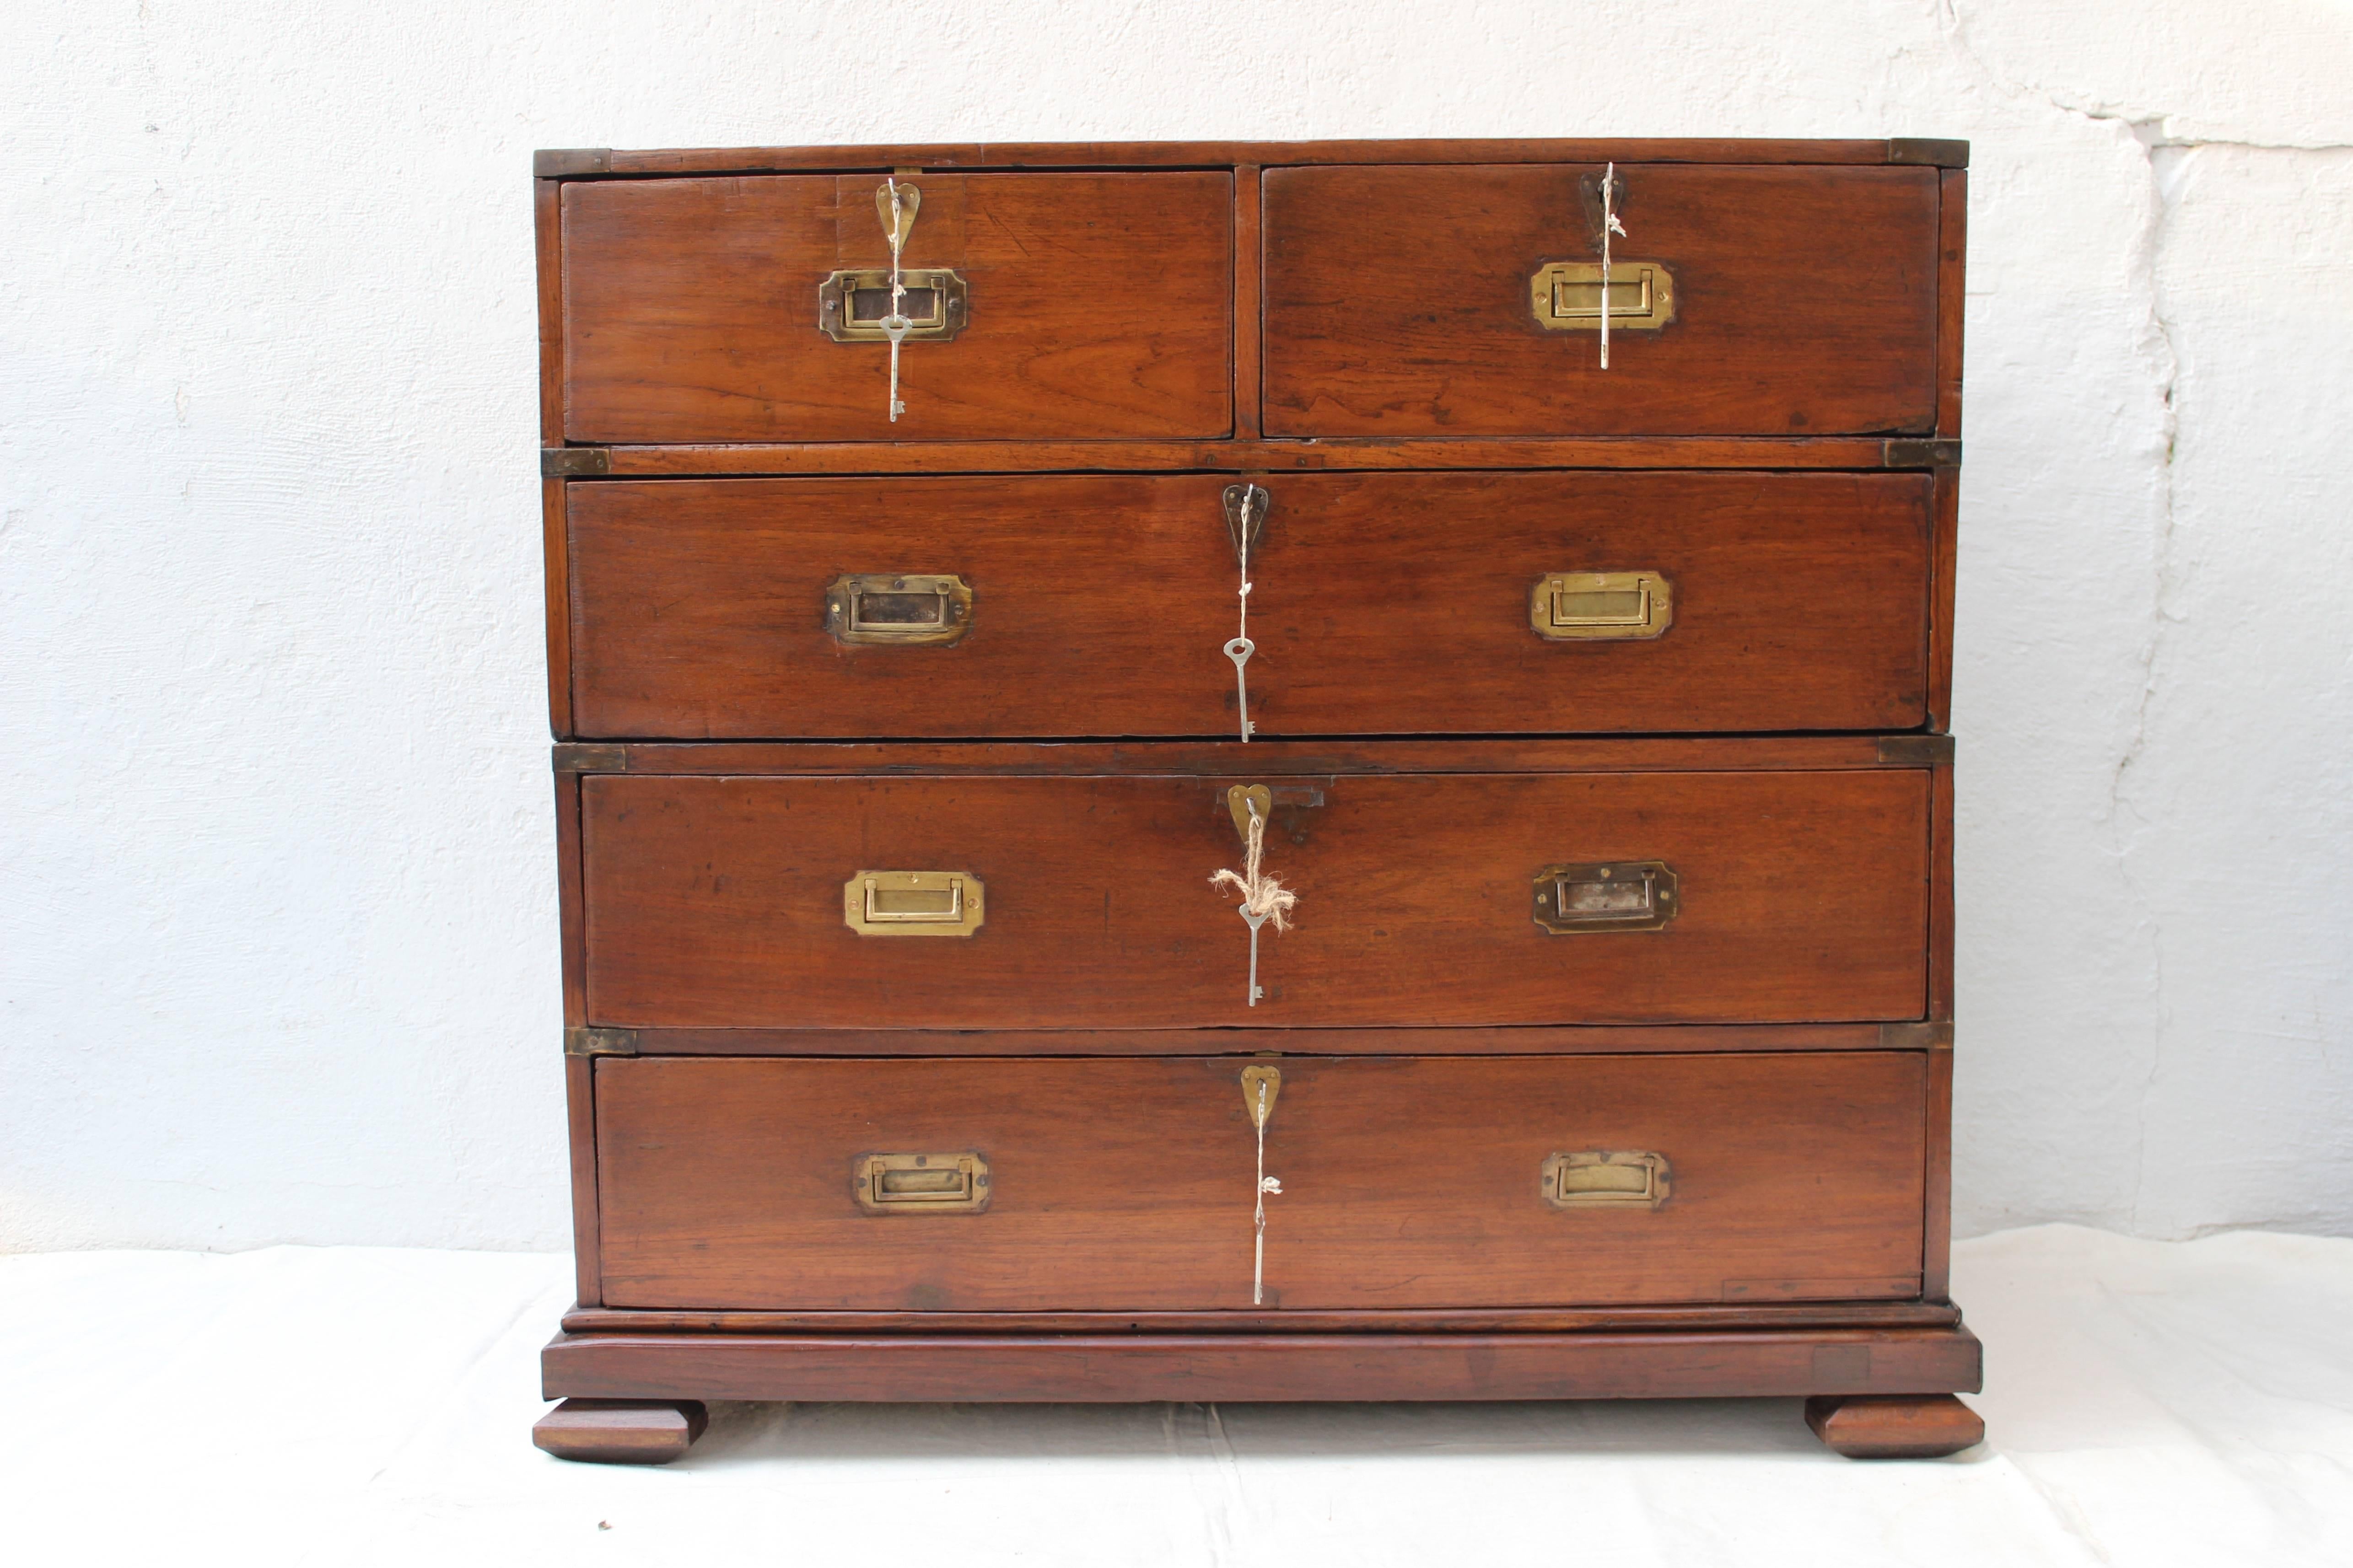 19th Century Two-Part Campaign Chest. Each drawer locks individually and has a set of two keys. All locks and keys work well.